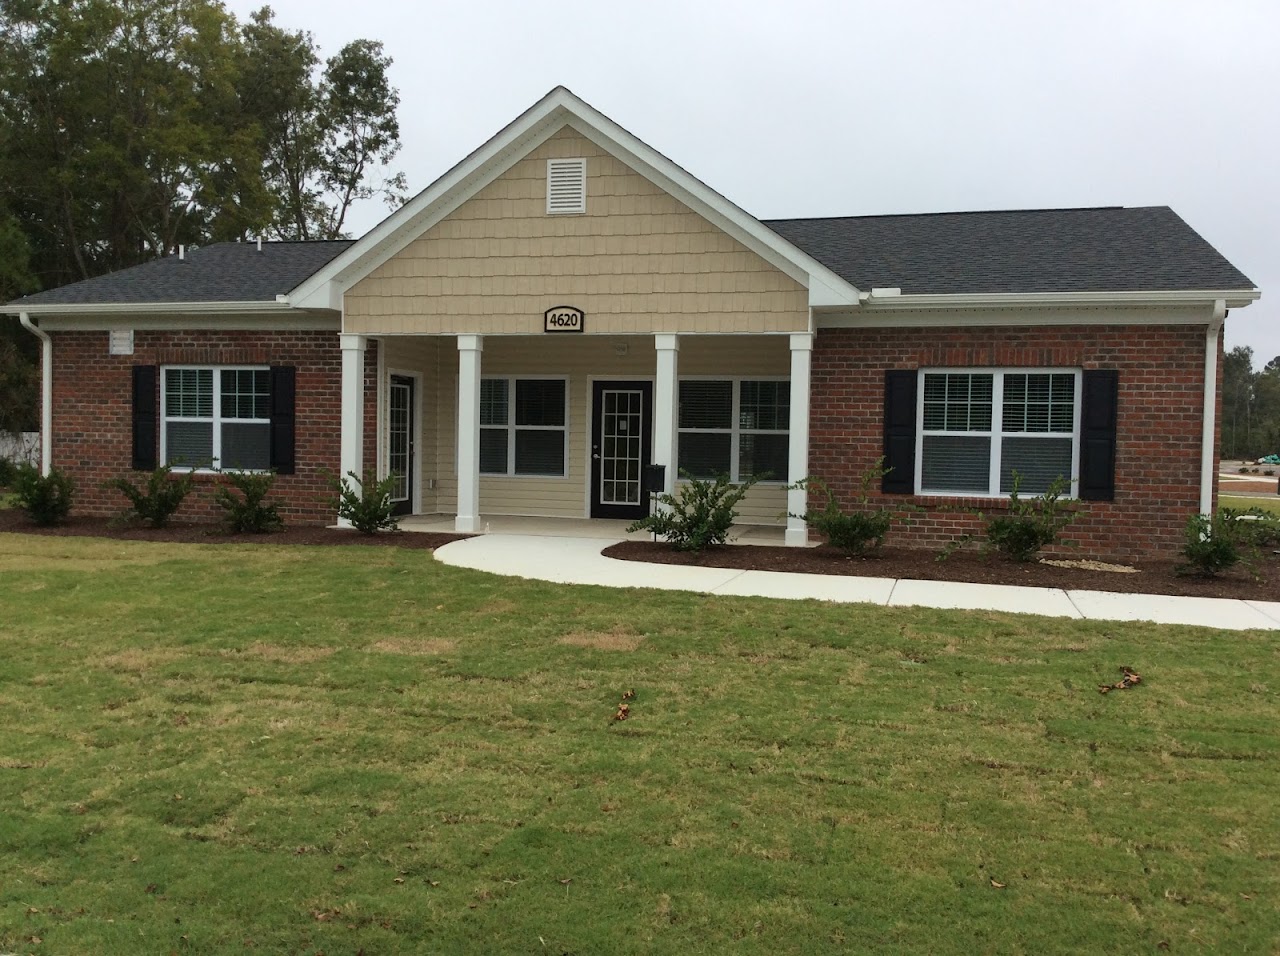 Photo of RIVER POINTE. Affordable housing located at 4620 WHITE STREET SHALLOTTE, NC 28470